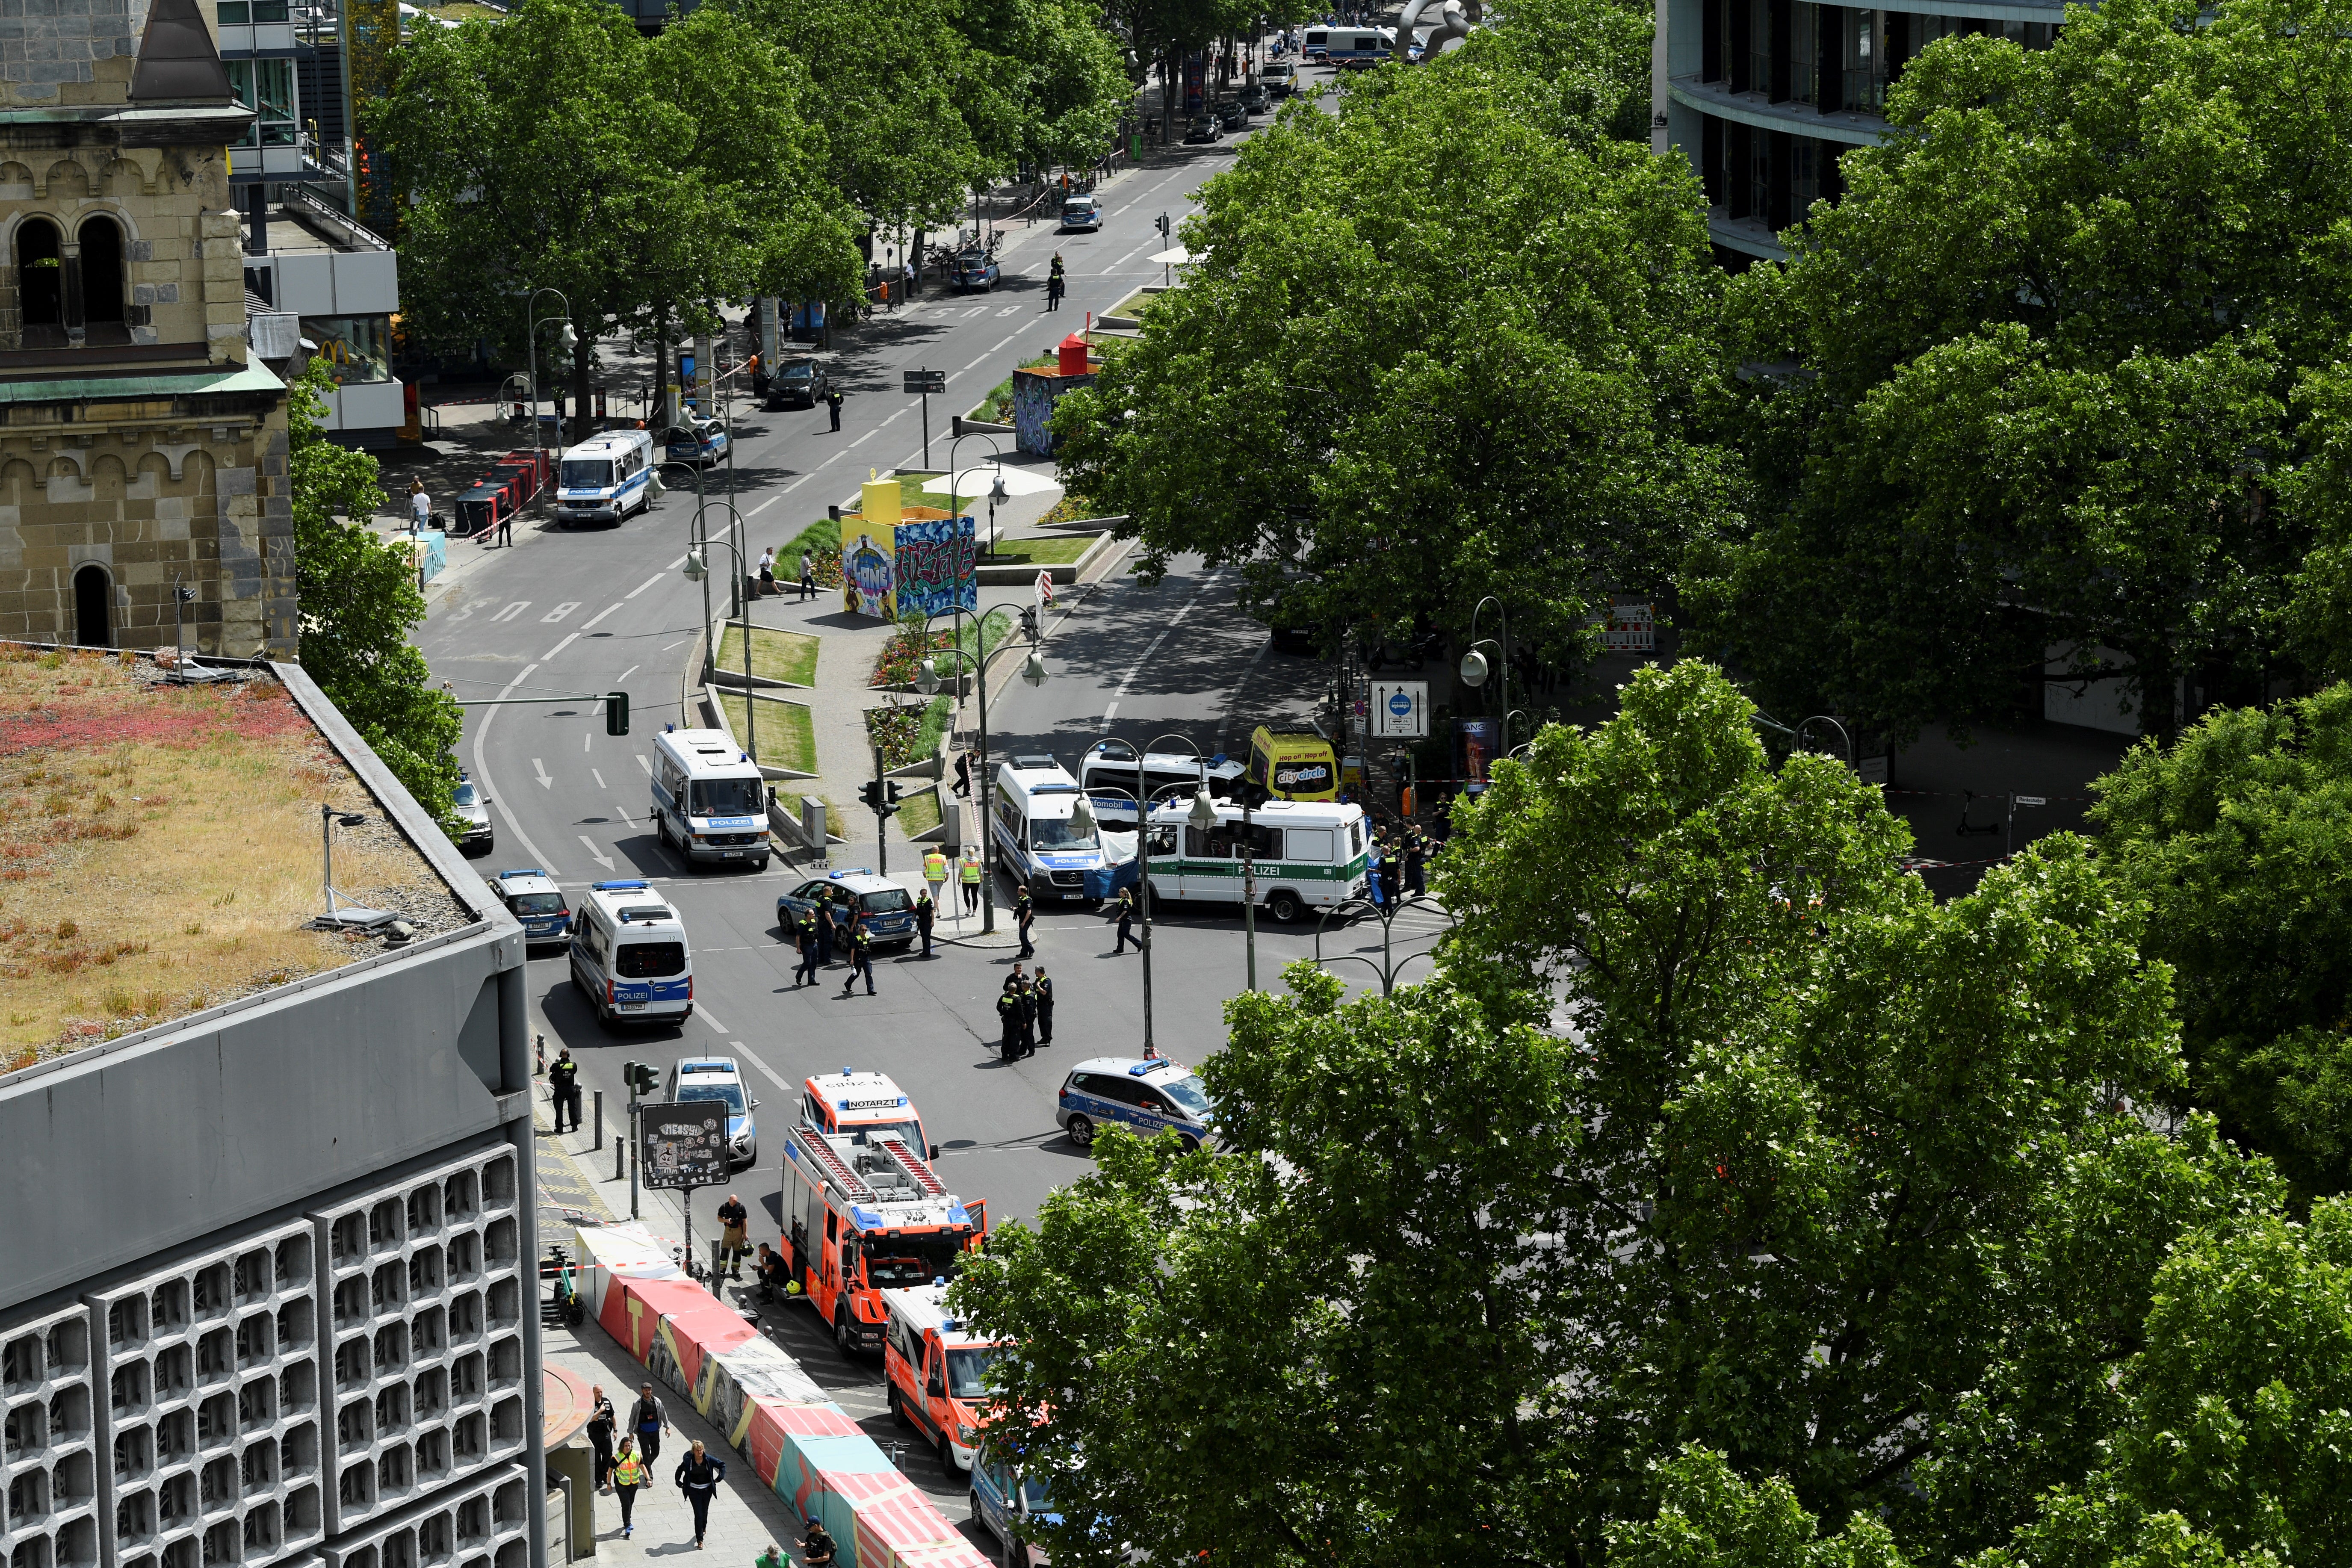 A general view shows the area where a car crashed into a group of people near Breitscheidplatz in Berlin